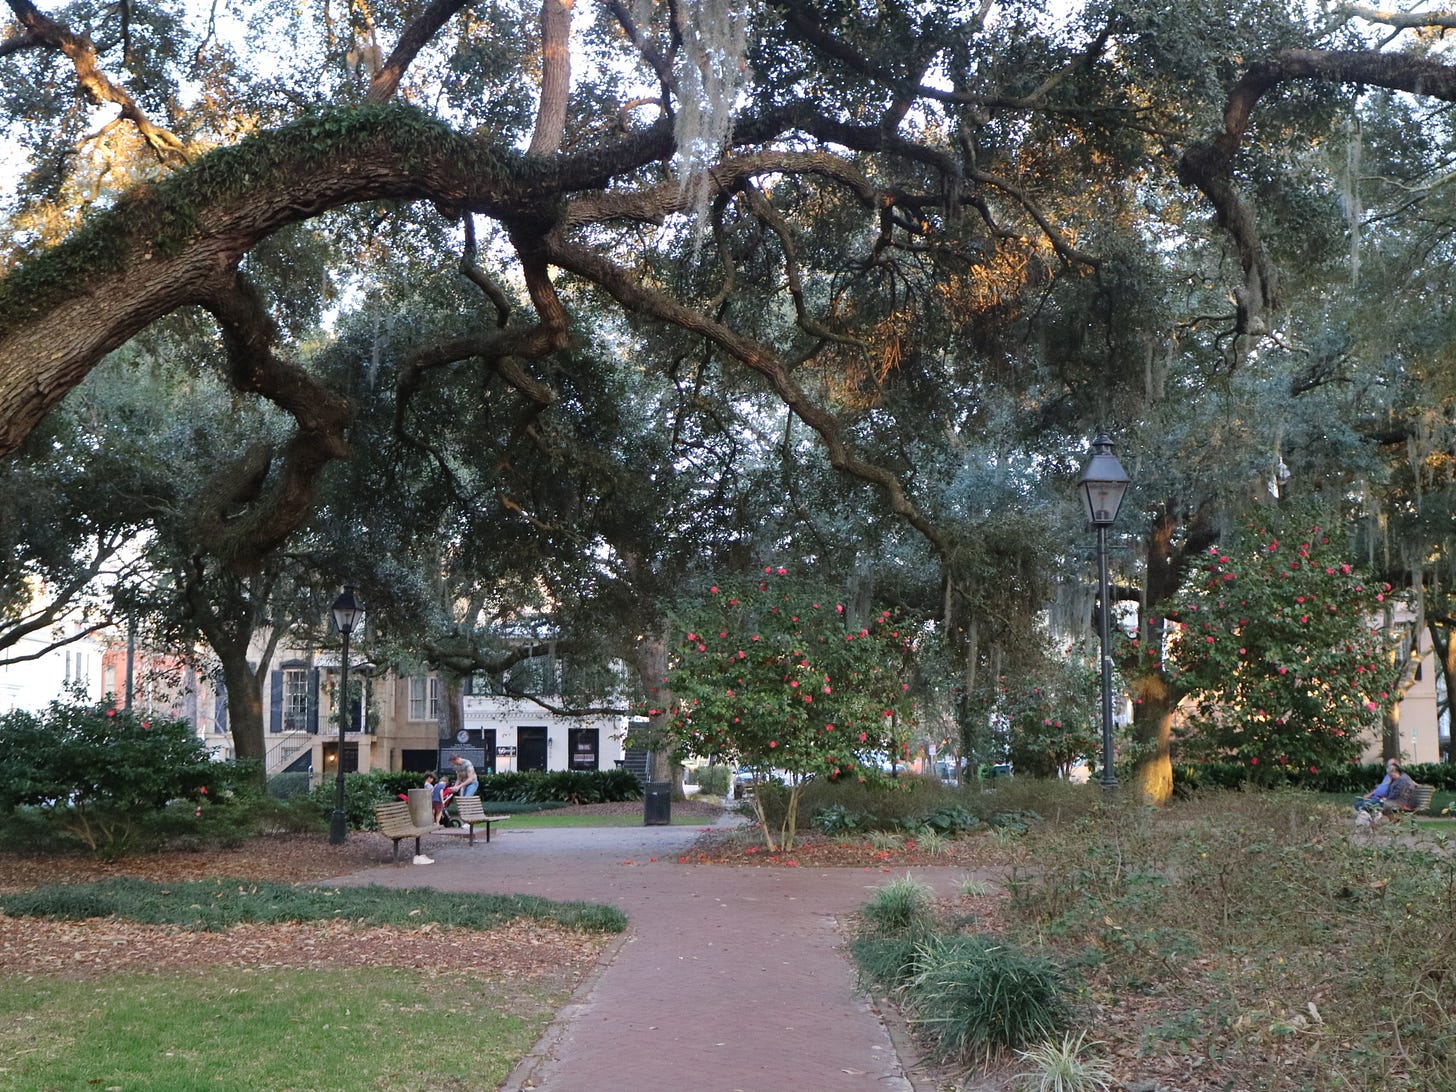 Image of Spanish moss in a Savannah square